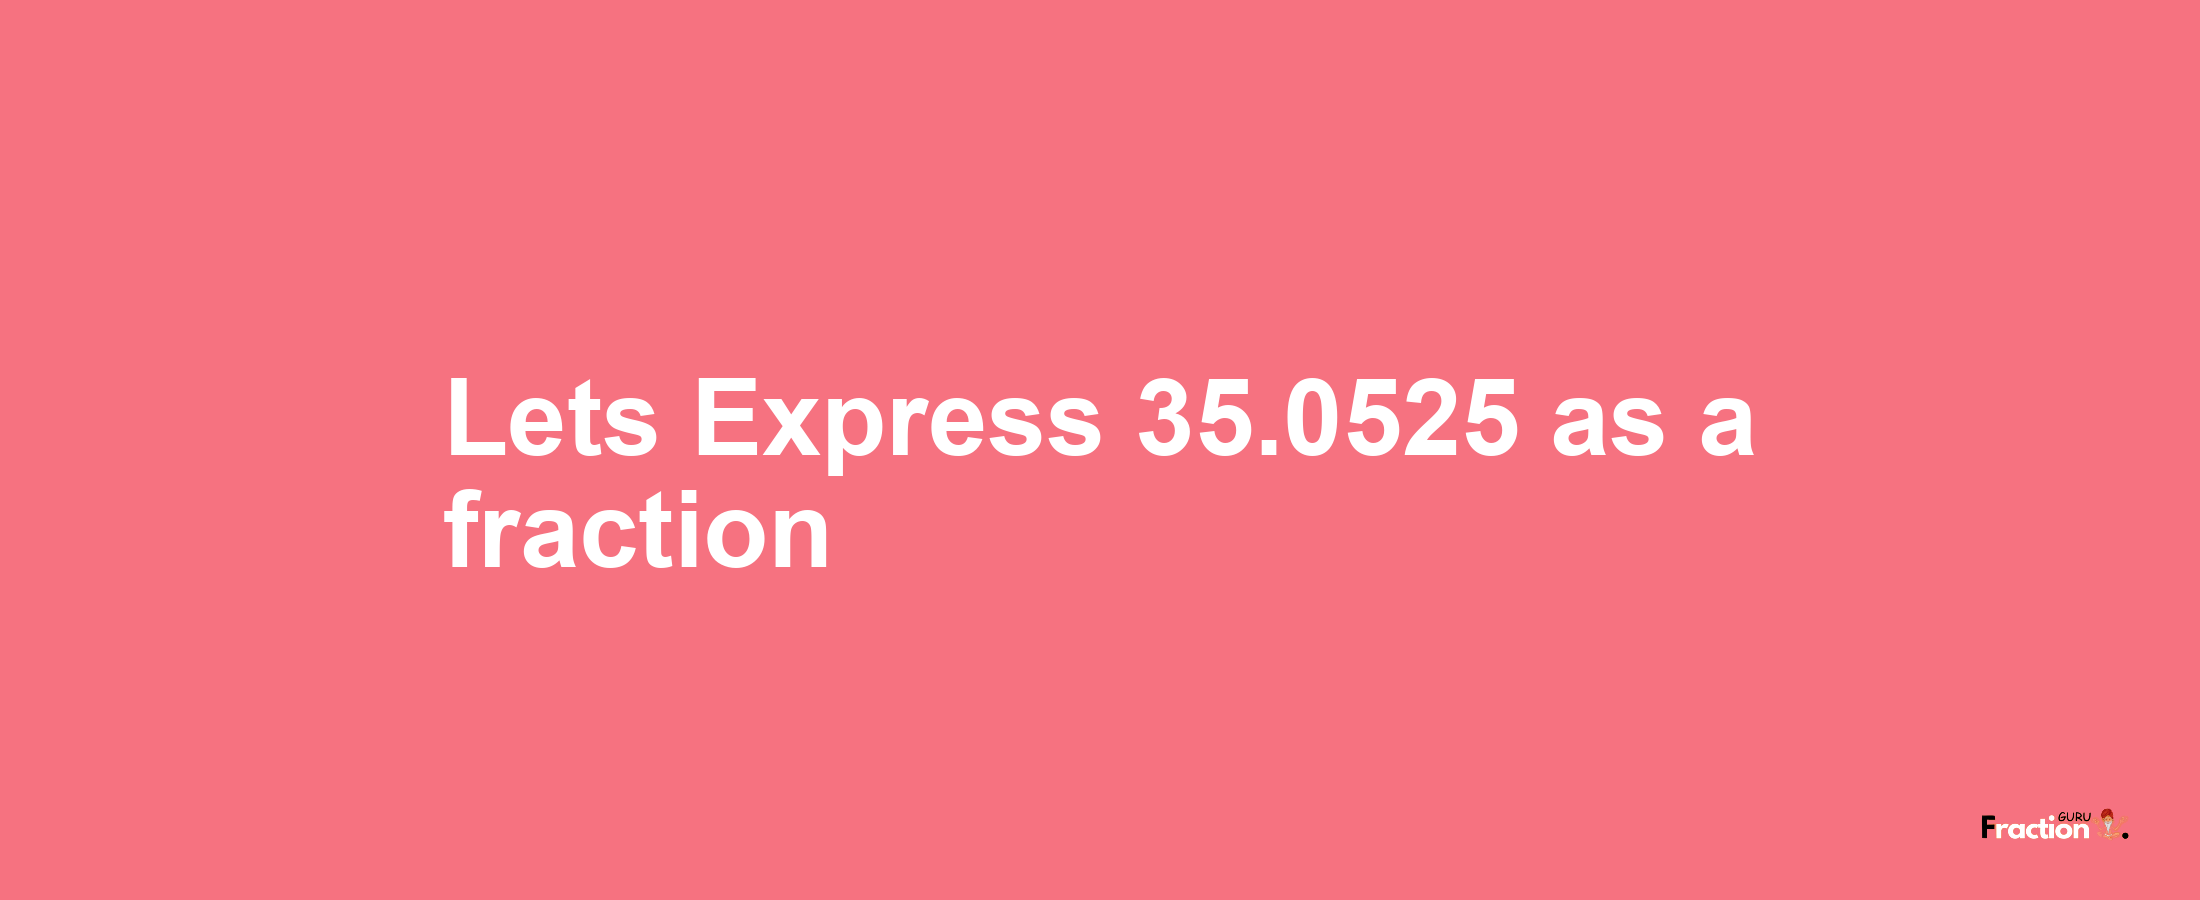 Lets Express 35.0525 as afraction